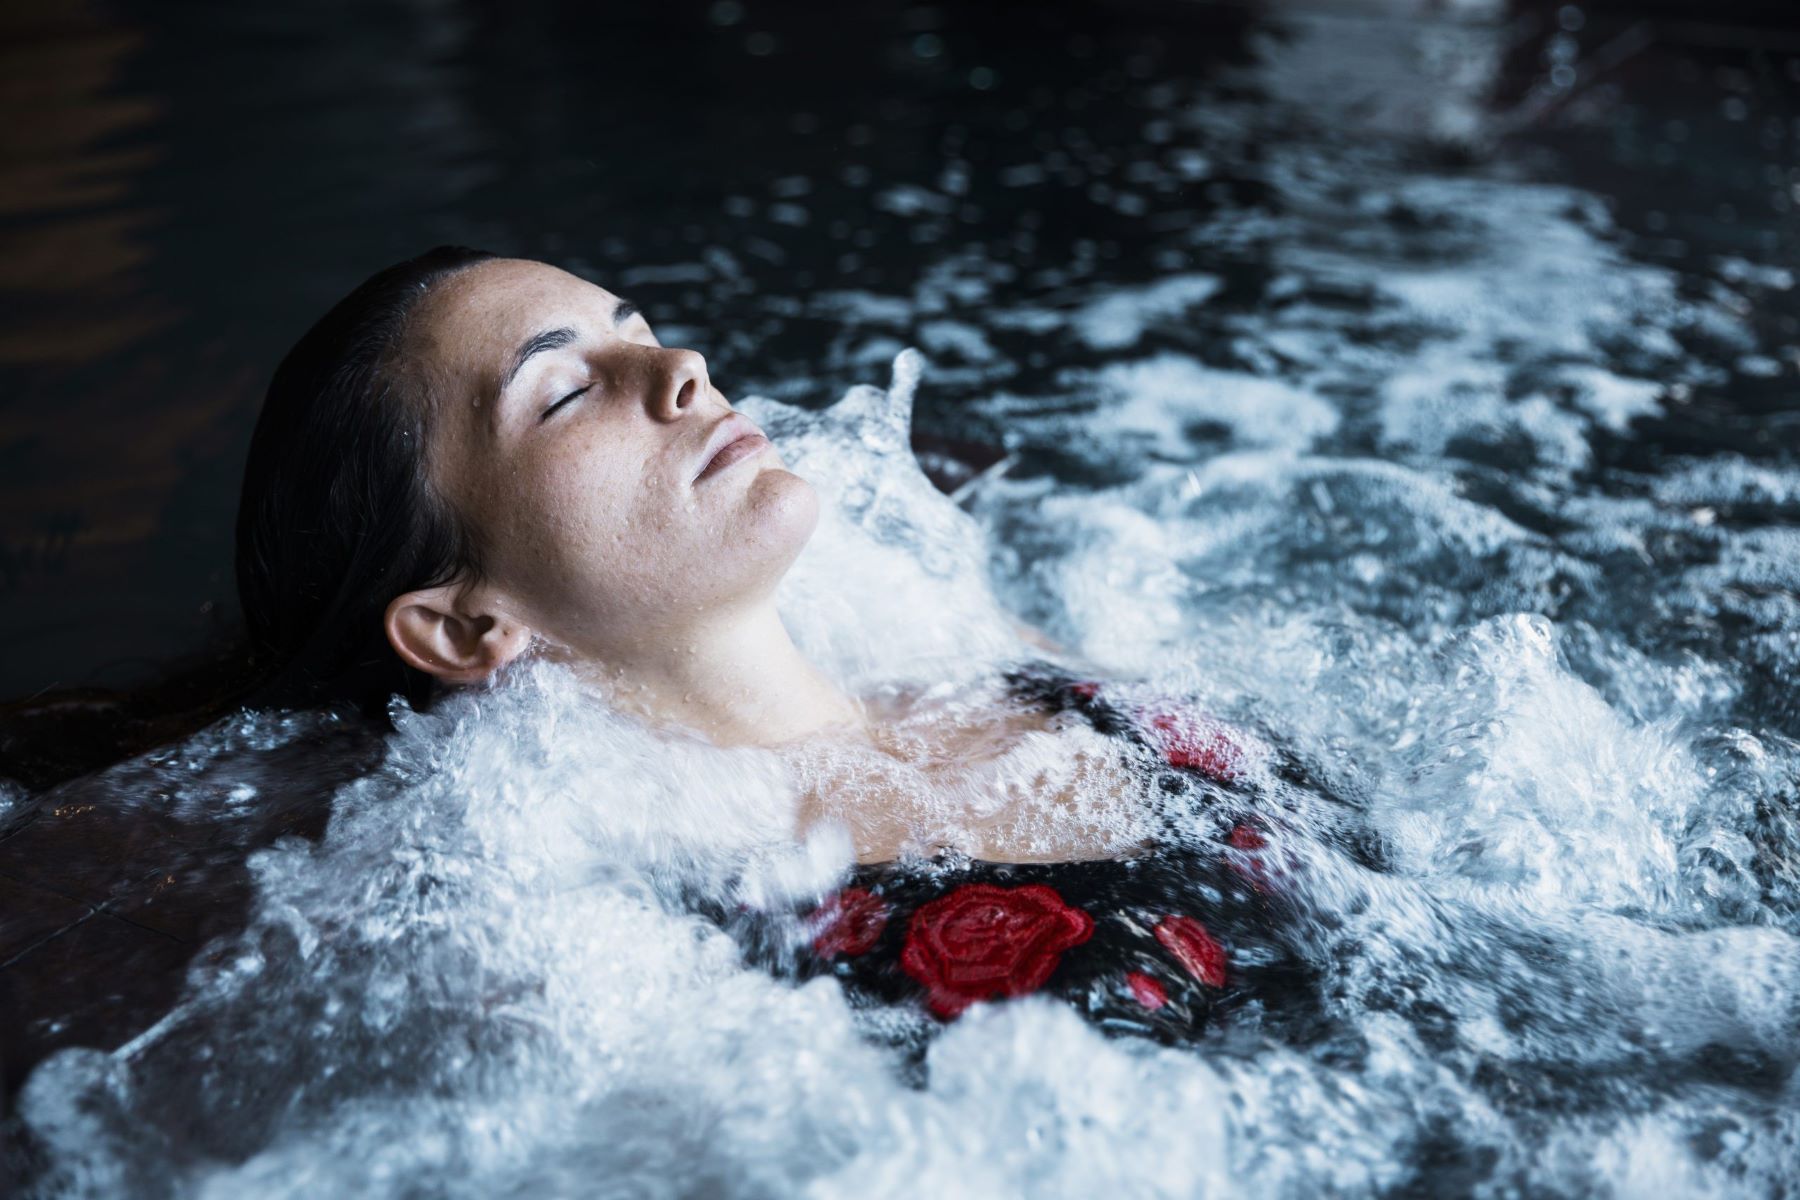 Benefits Of Cold Water Therapy For Runners